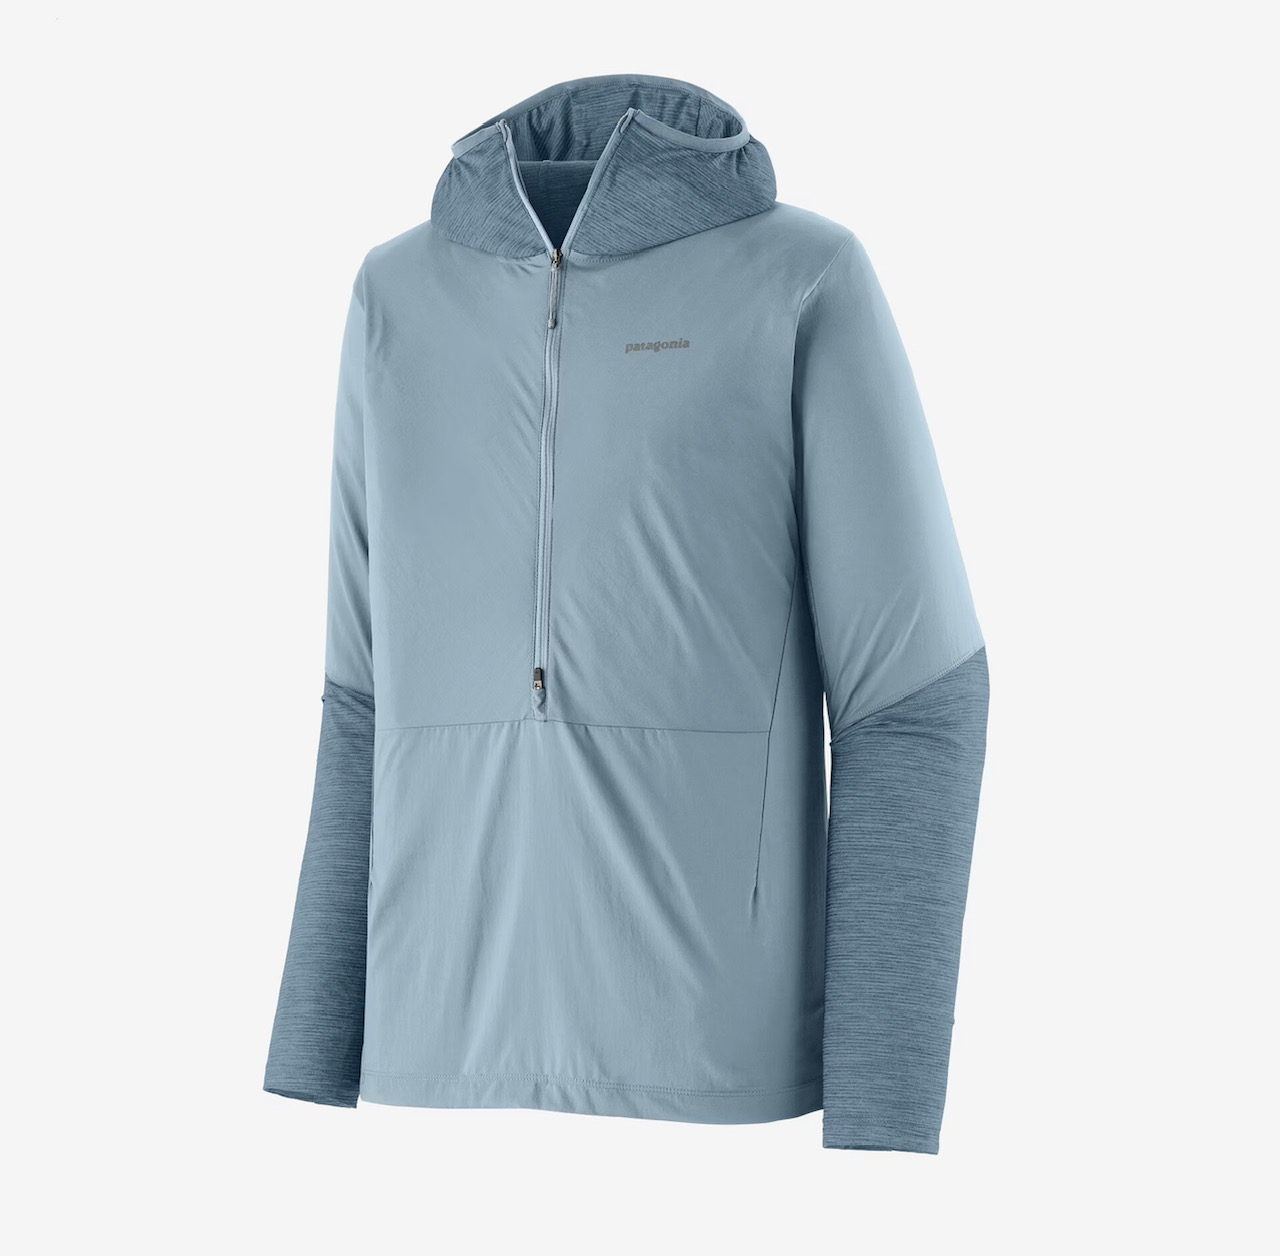 Patagonia M's Airshed Pro Pullover - Steam Blue - Medium